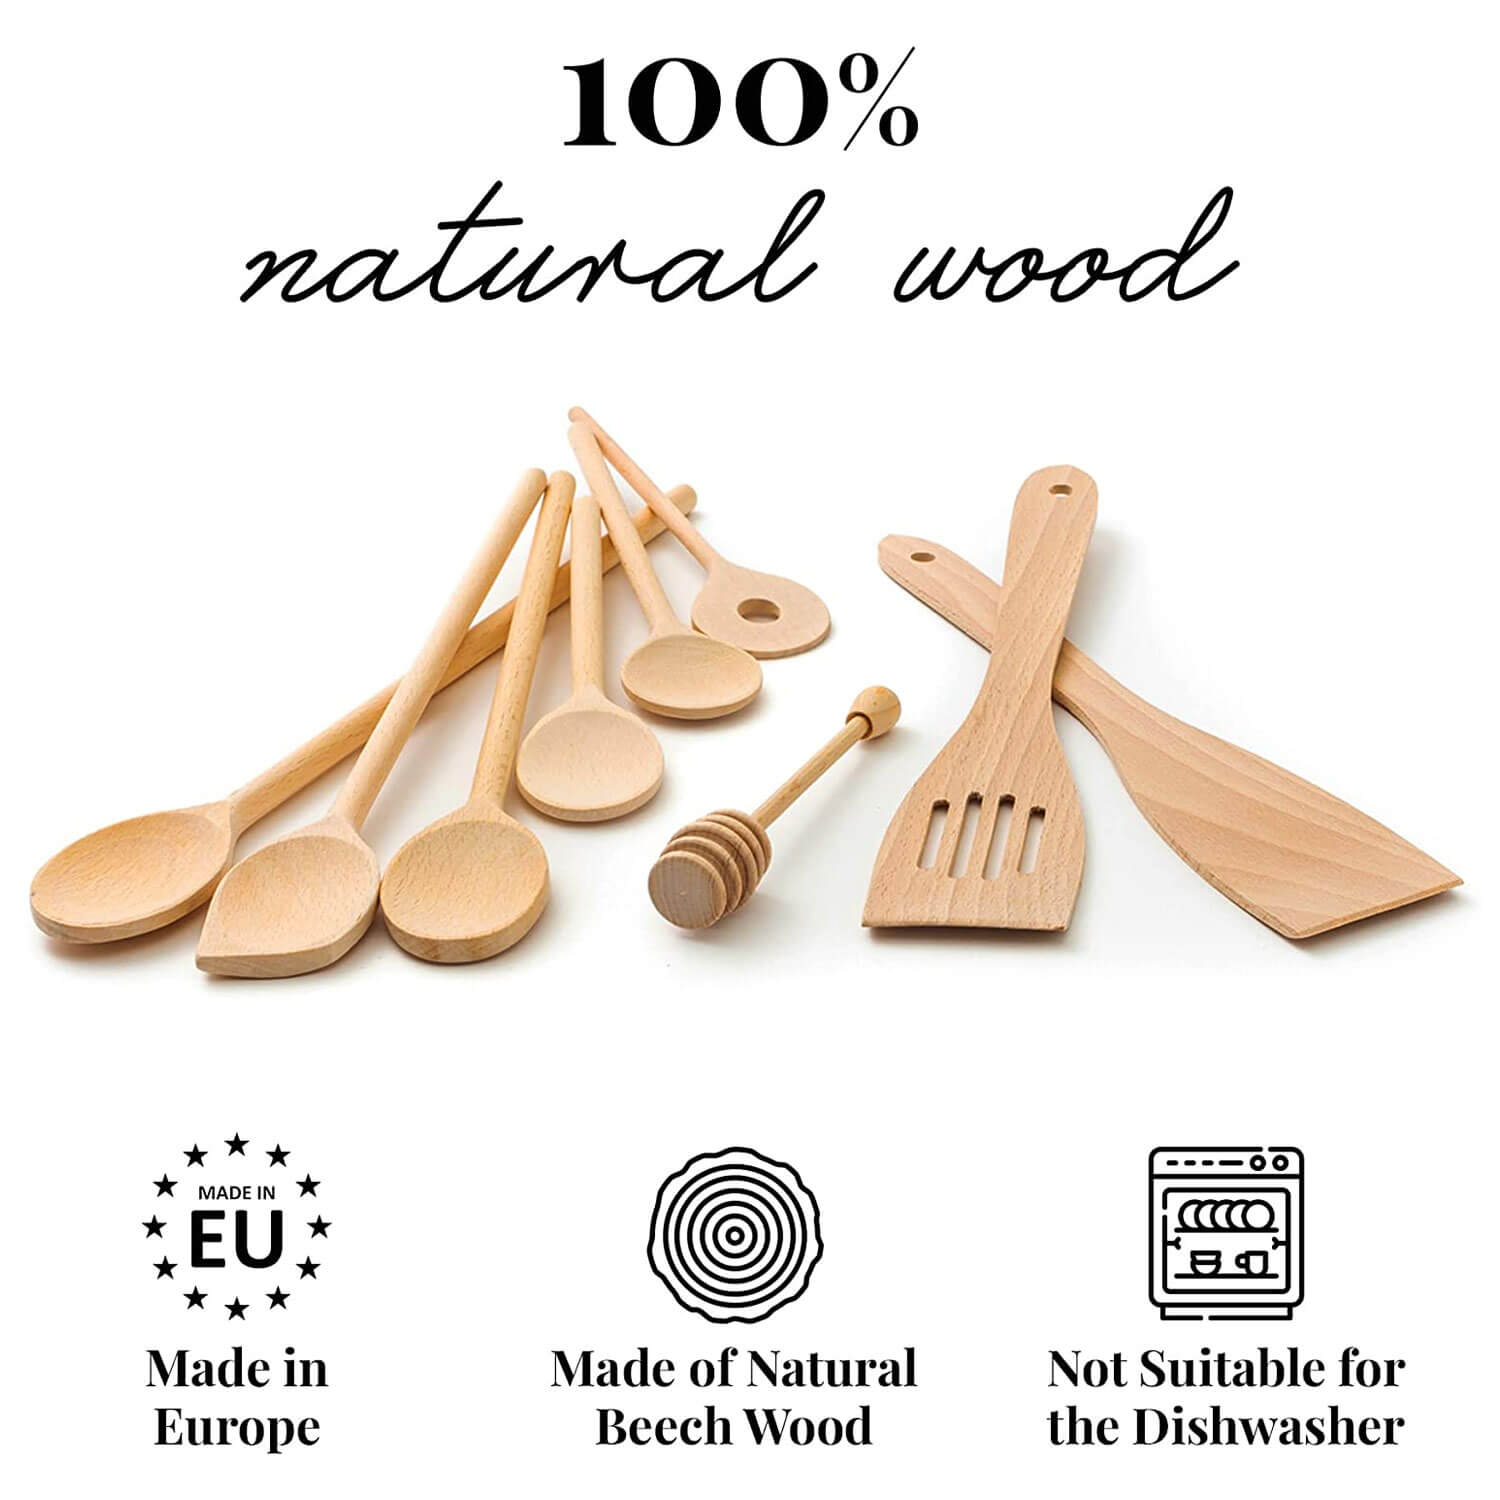 https://cdn.shopify.com/s/files/1/0515/2440/3381/products/9-piece-wooden-kitchen-utensil-set-cooking-spoons-spatulas-honey-spoon-tuuli-302.jpg